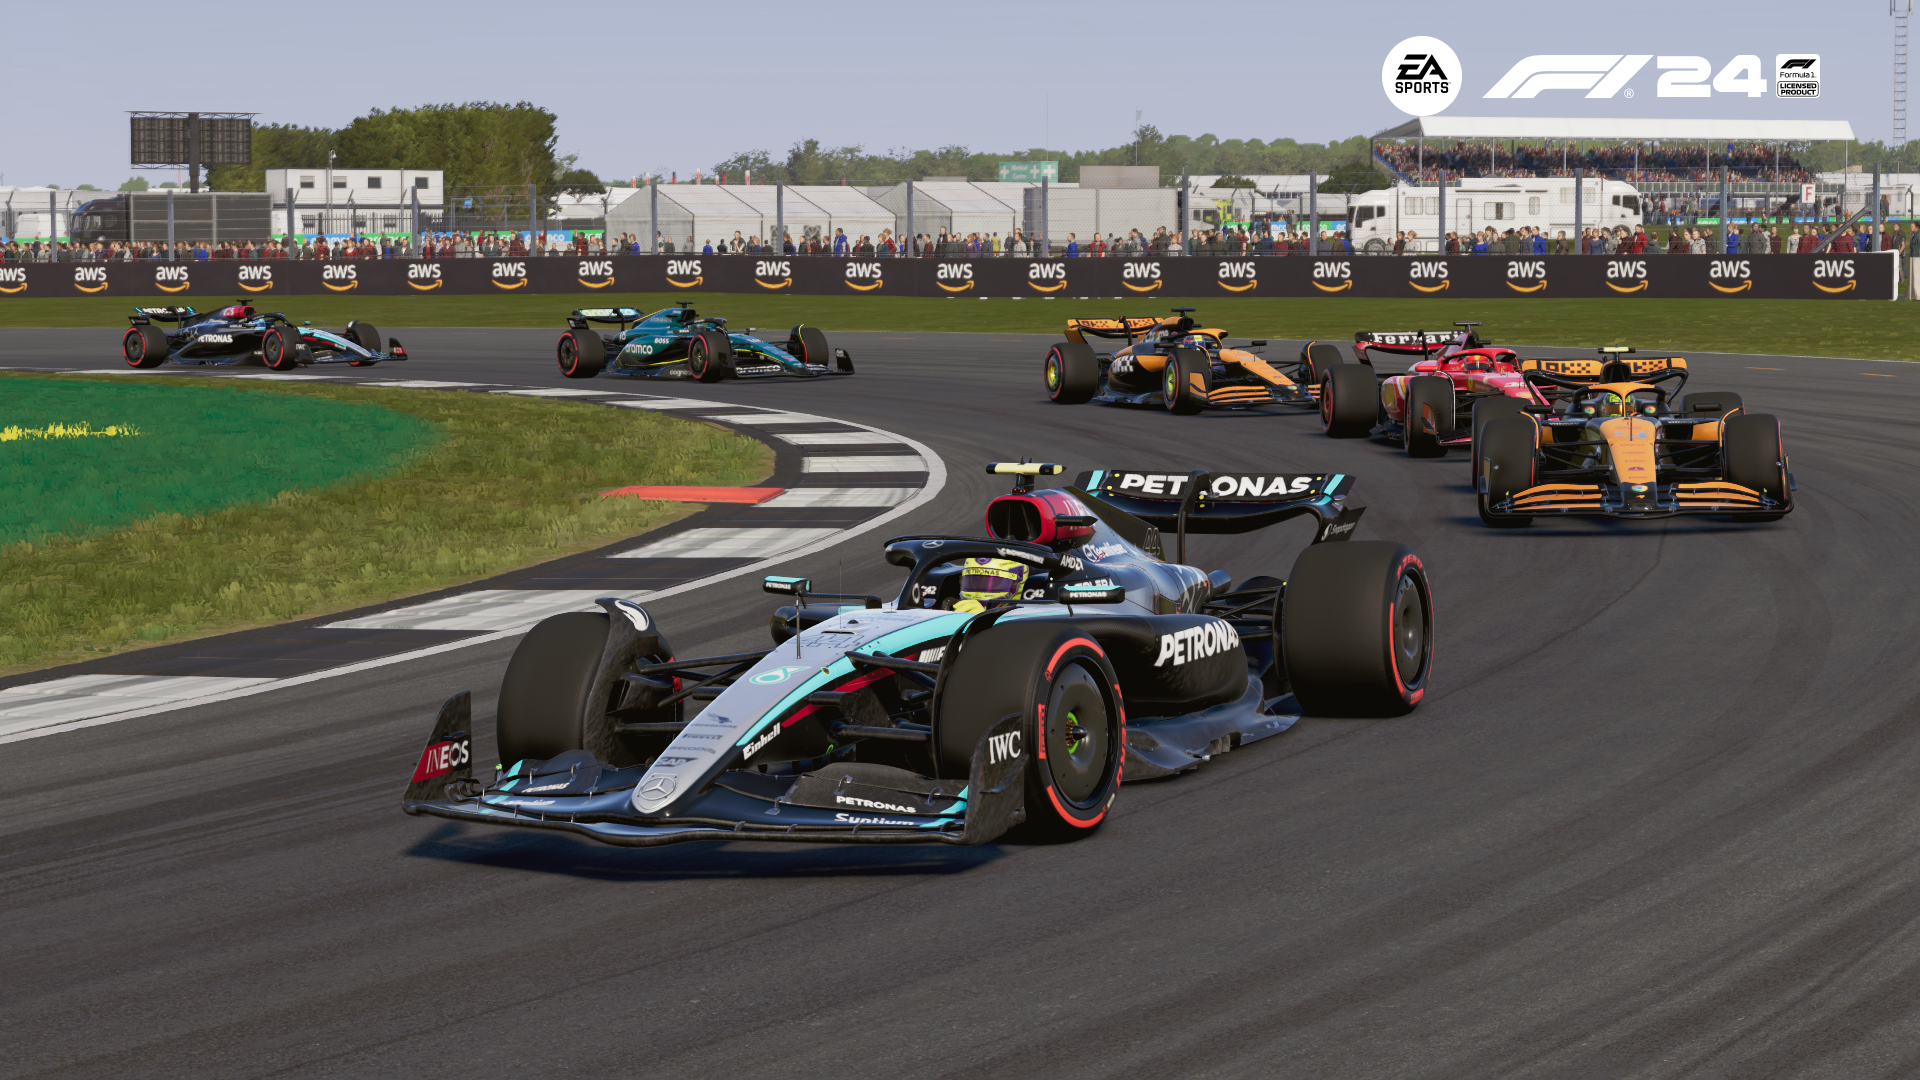 F1 24 game